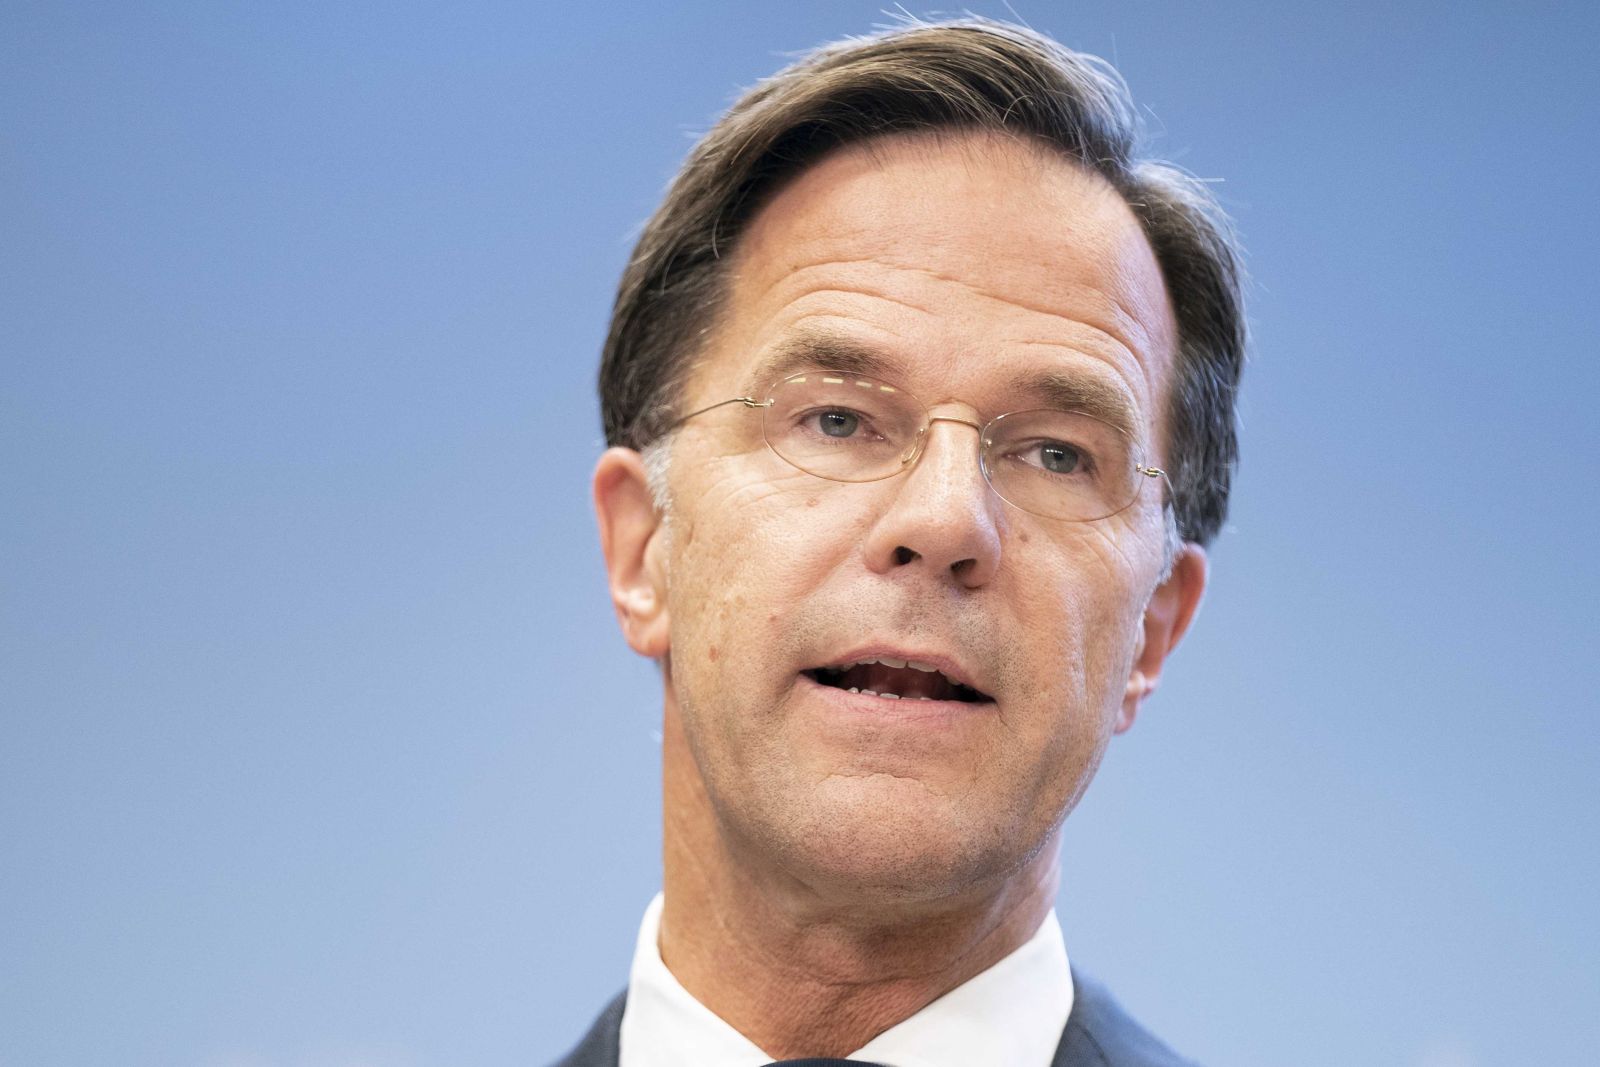 epa09468187 Outgoing Dutch Prime Minister Mark Rutte speaks during a press conference about easing coronavirus pandemic restriction, in The Hague, the Netherlands, 14 September 2021.  EPA/Bart Maat